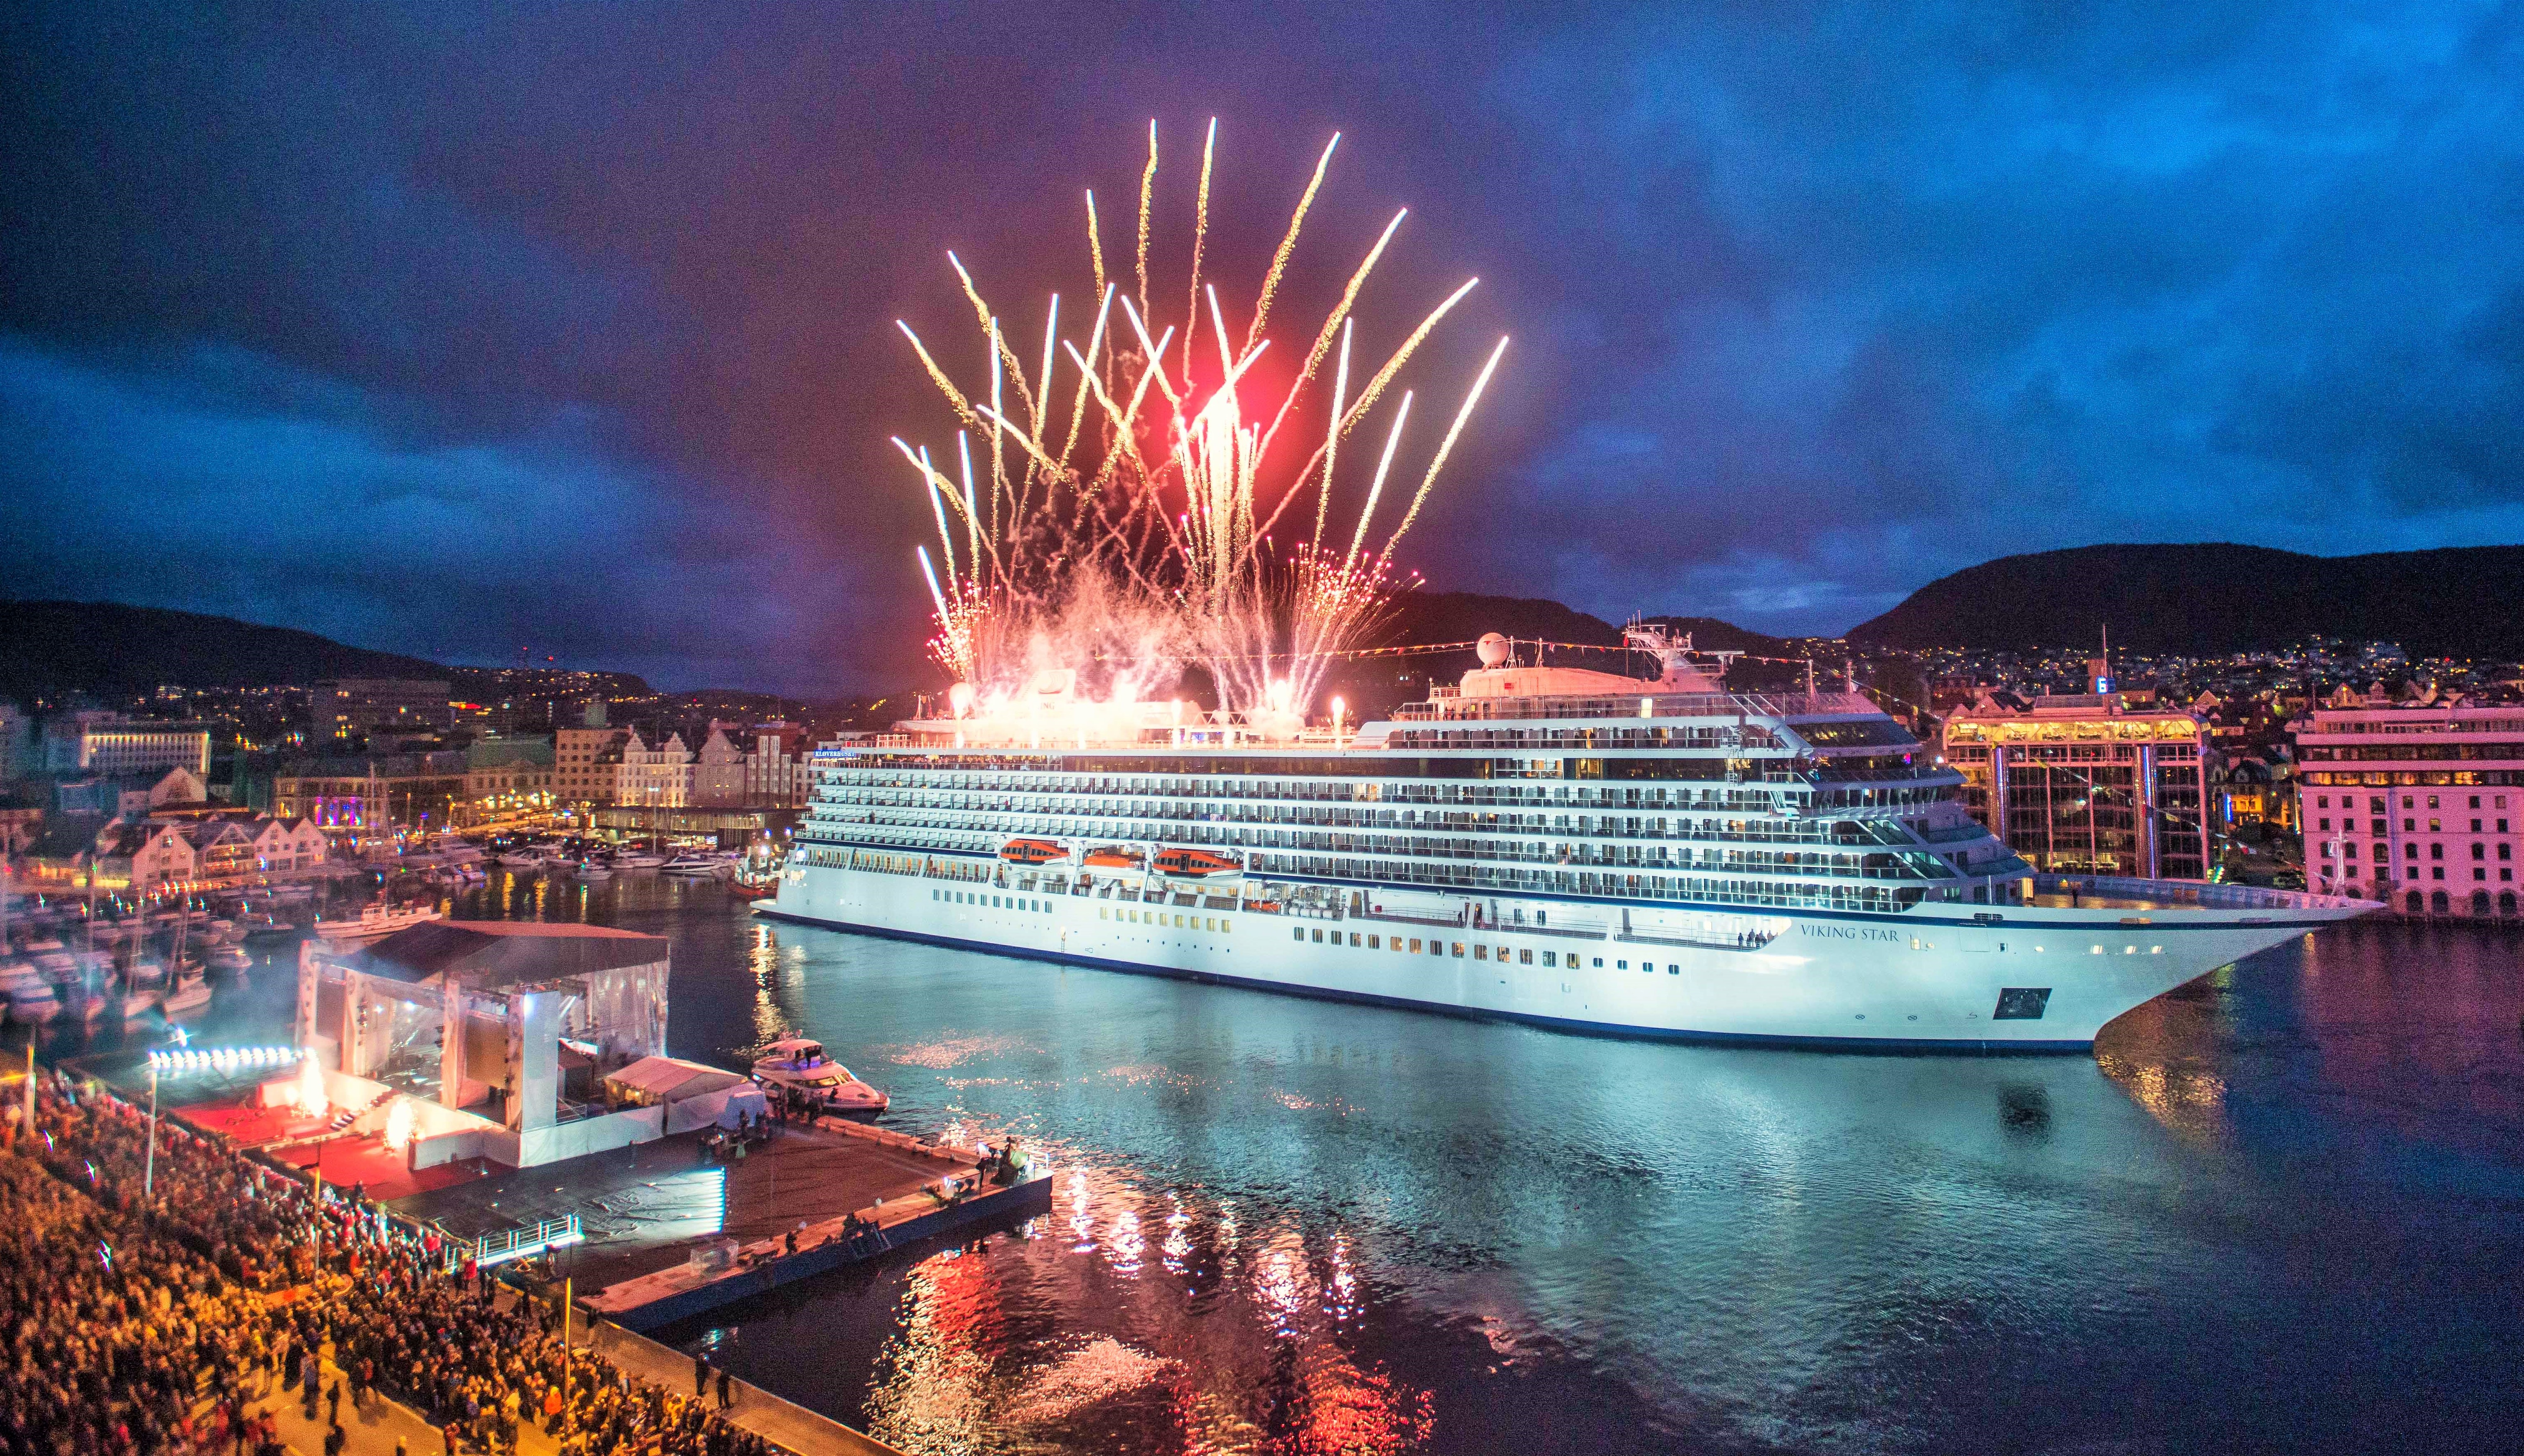 Viking Star Christened In Home Port Of Bergen Norway Cruise